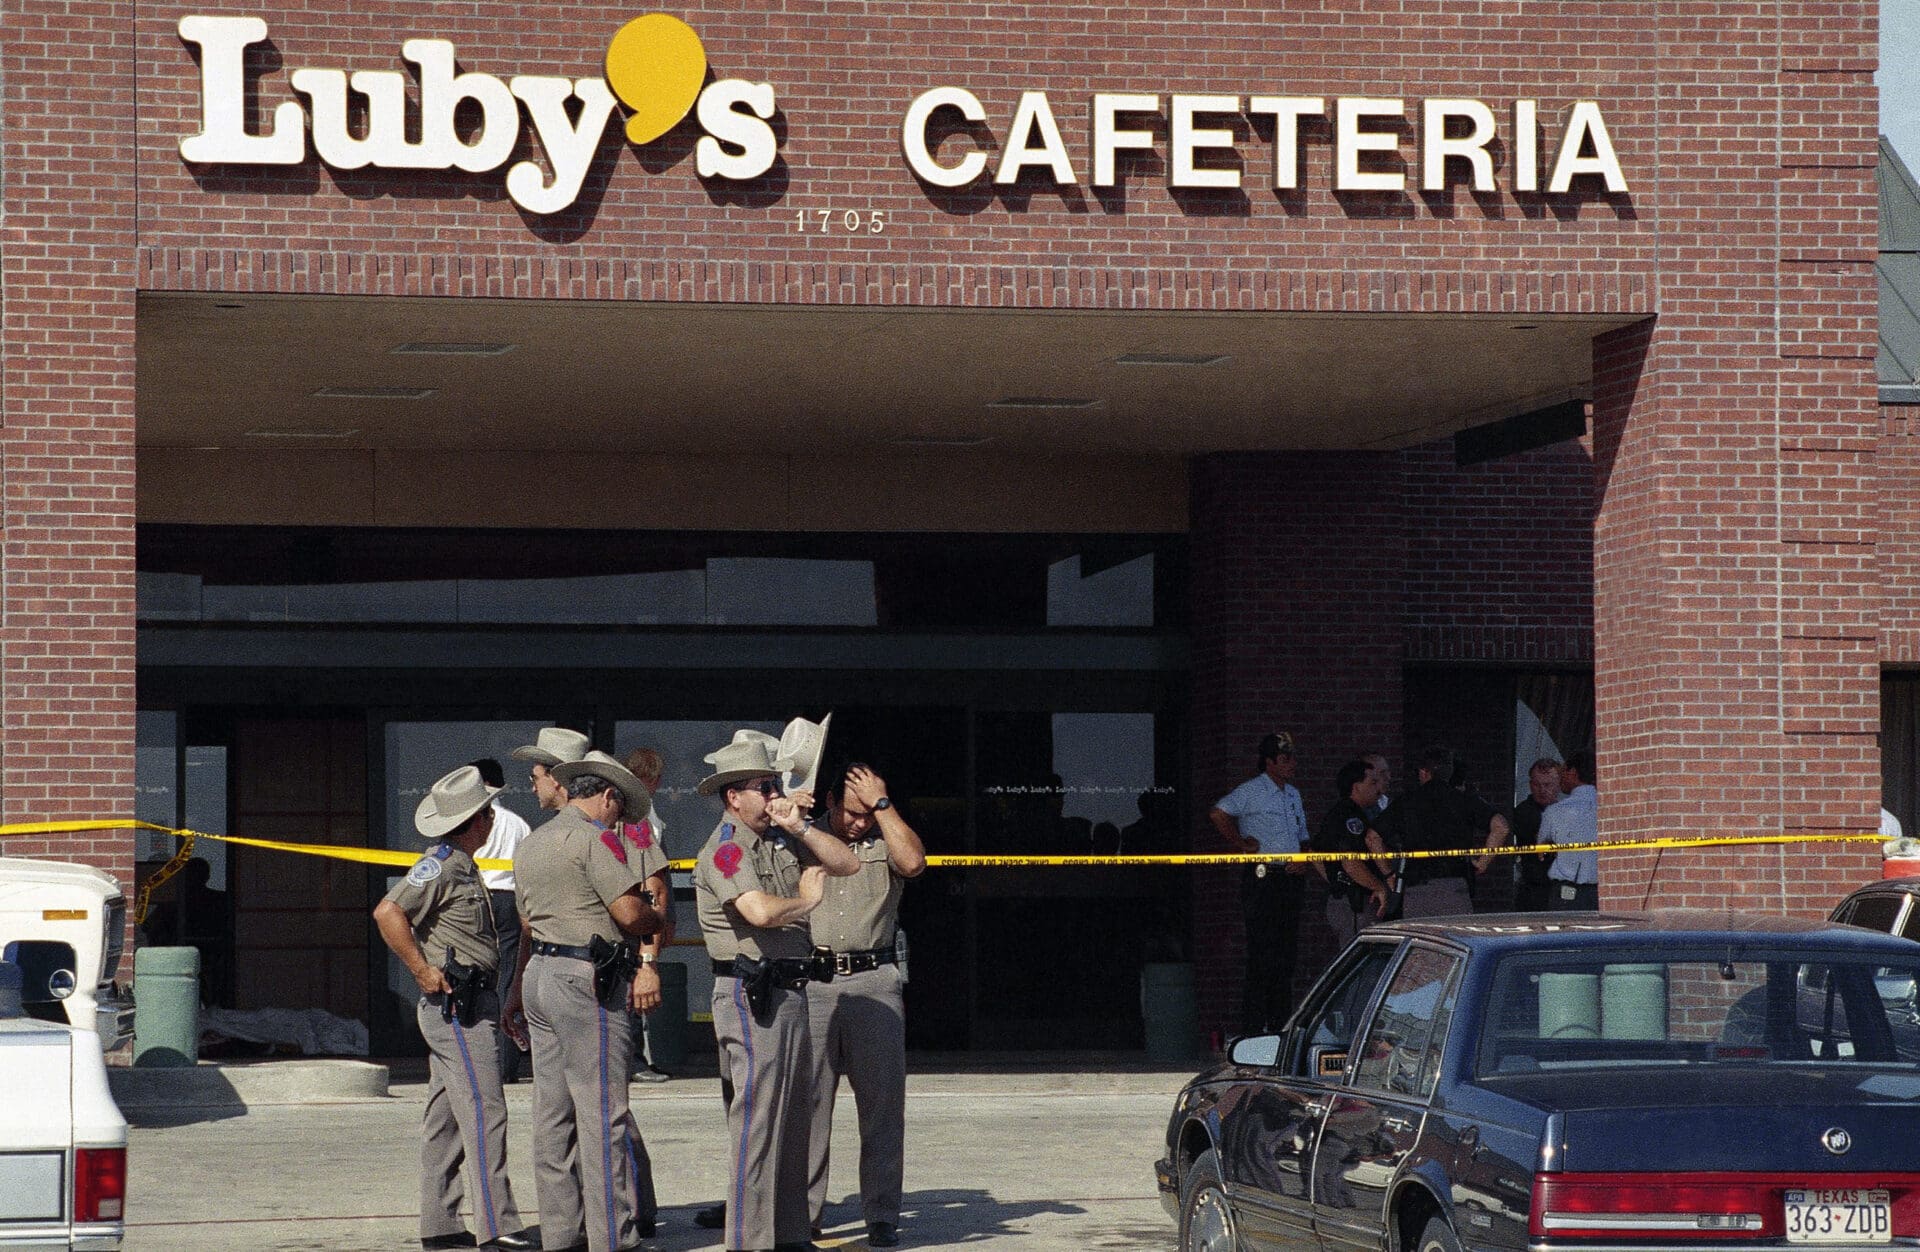 Luby's Cafeteria massacre shooting